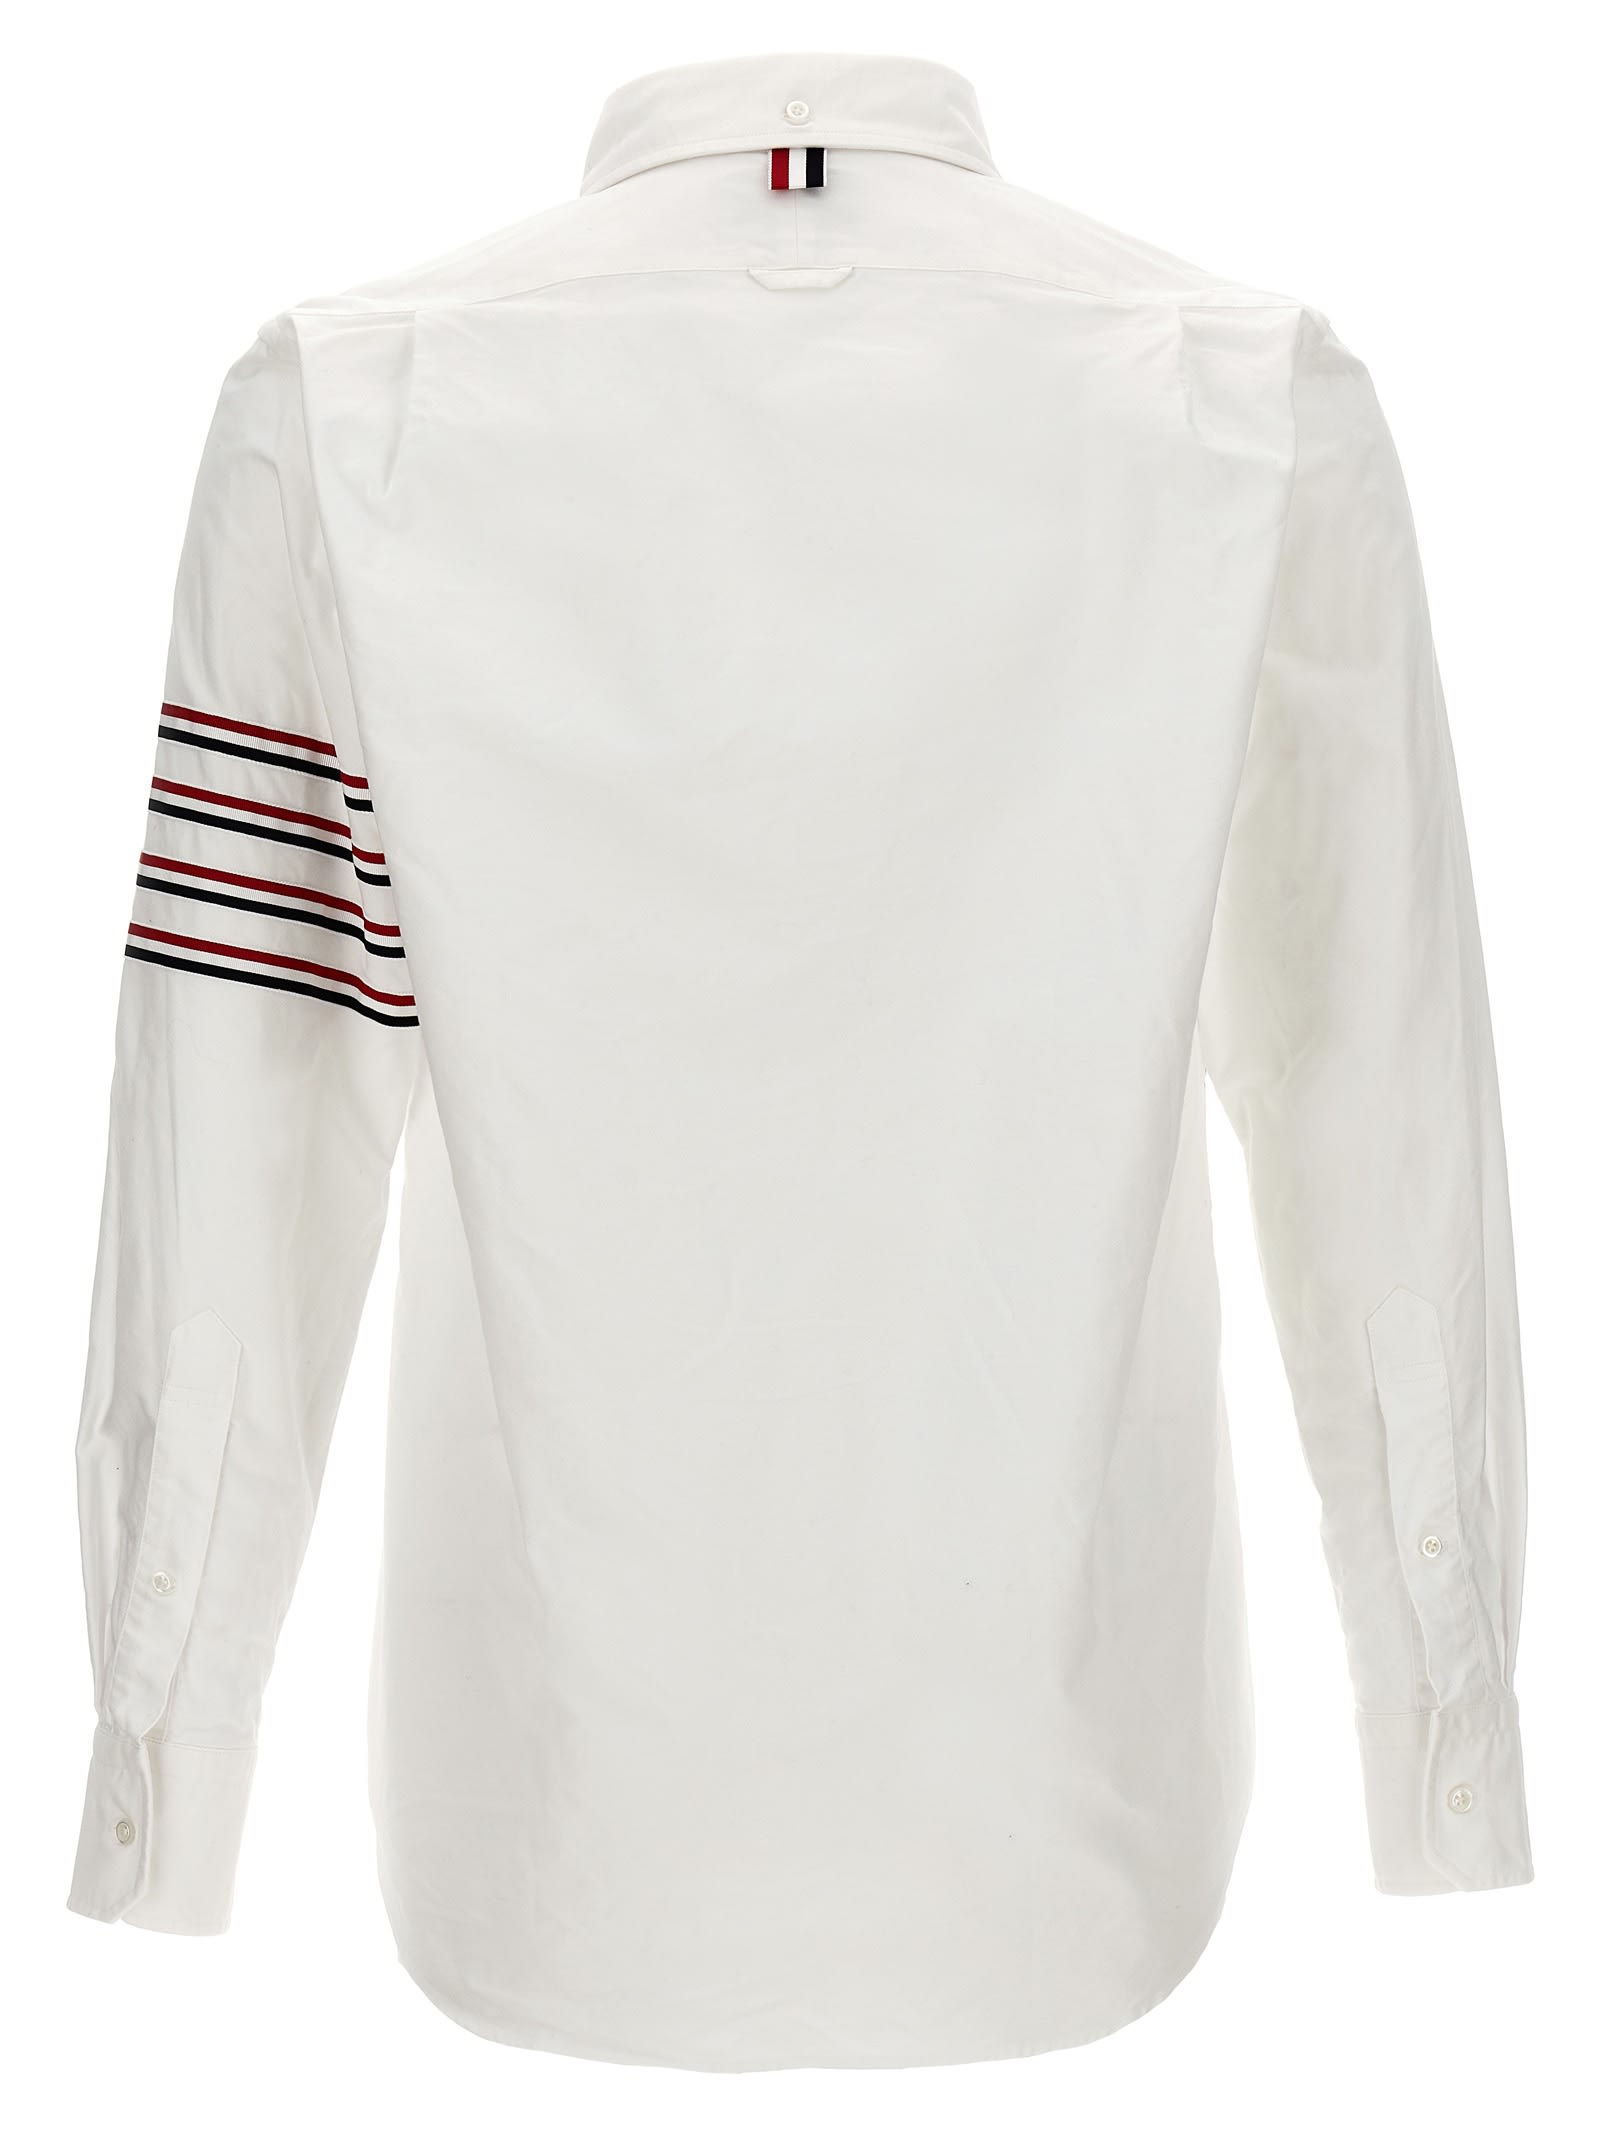 Shop Thom Browne Straight Fit Shirt In White